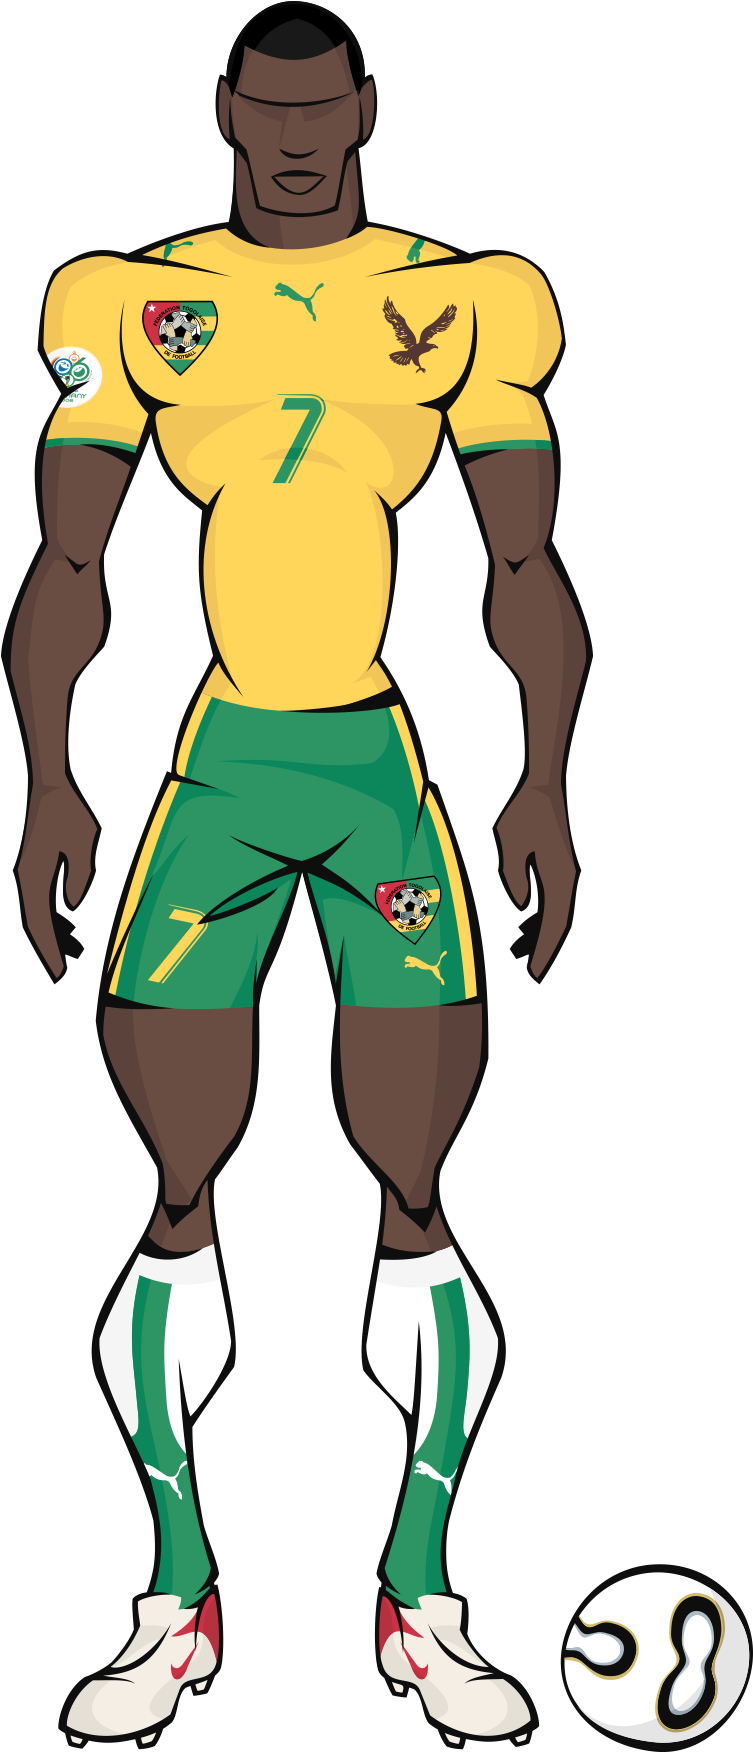 South Africa 2010 Fifa World Cup Cameroon National - Home Kit Angola 2006 (920x1970)